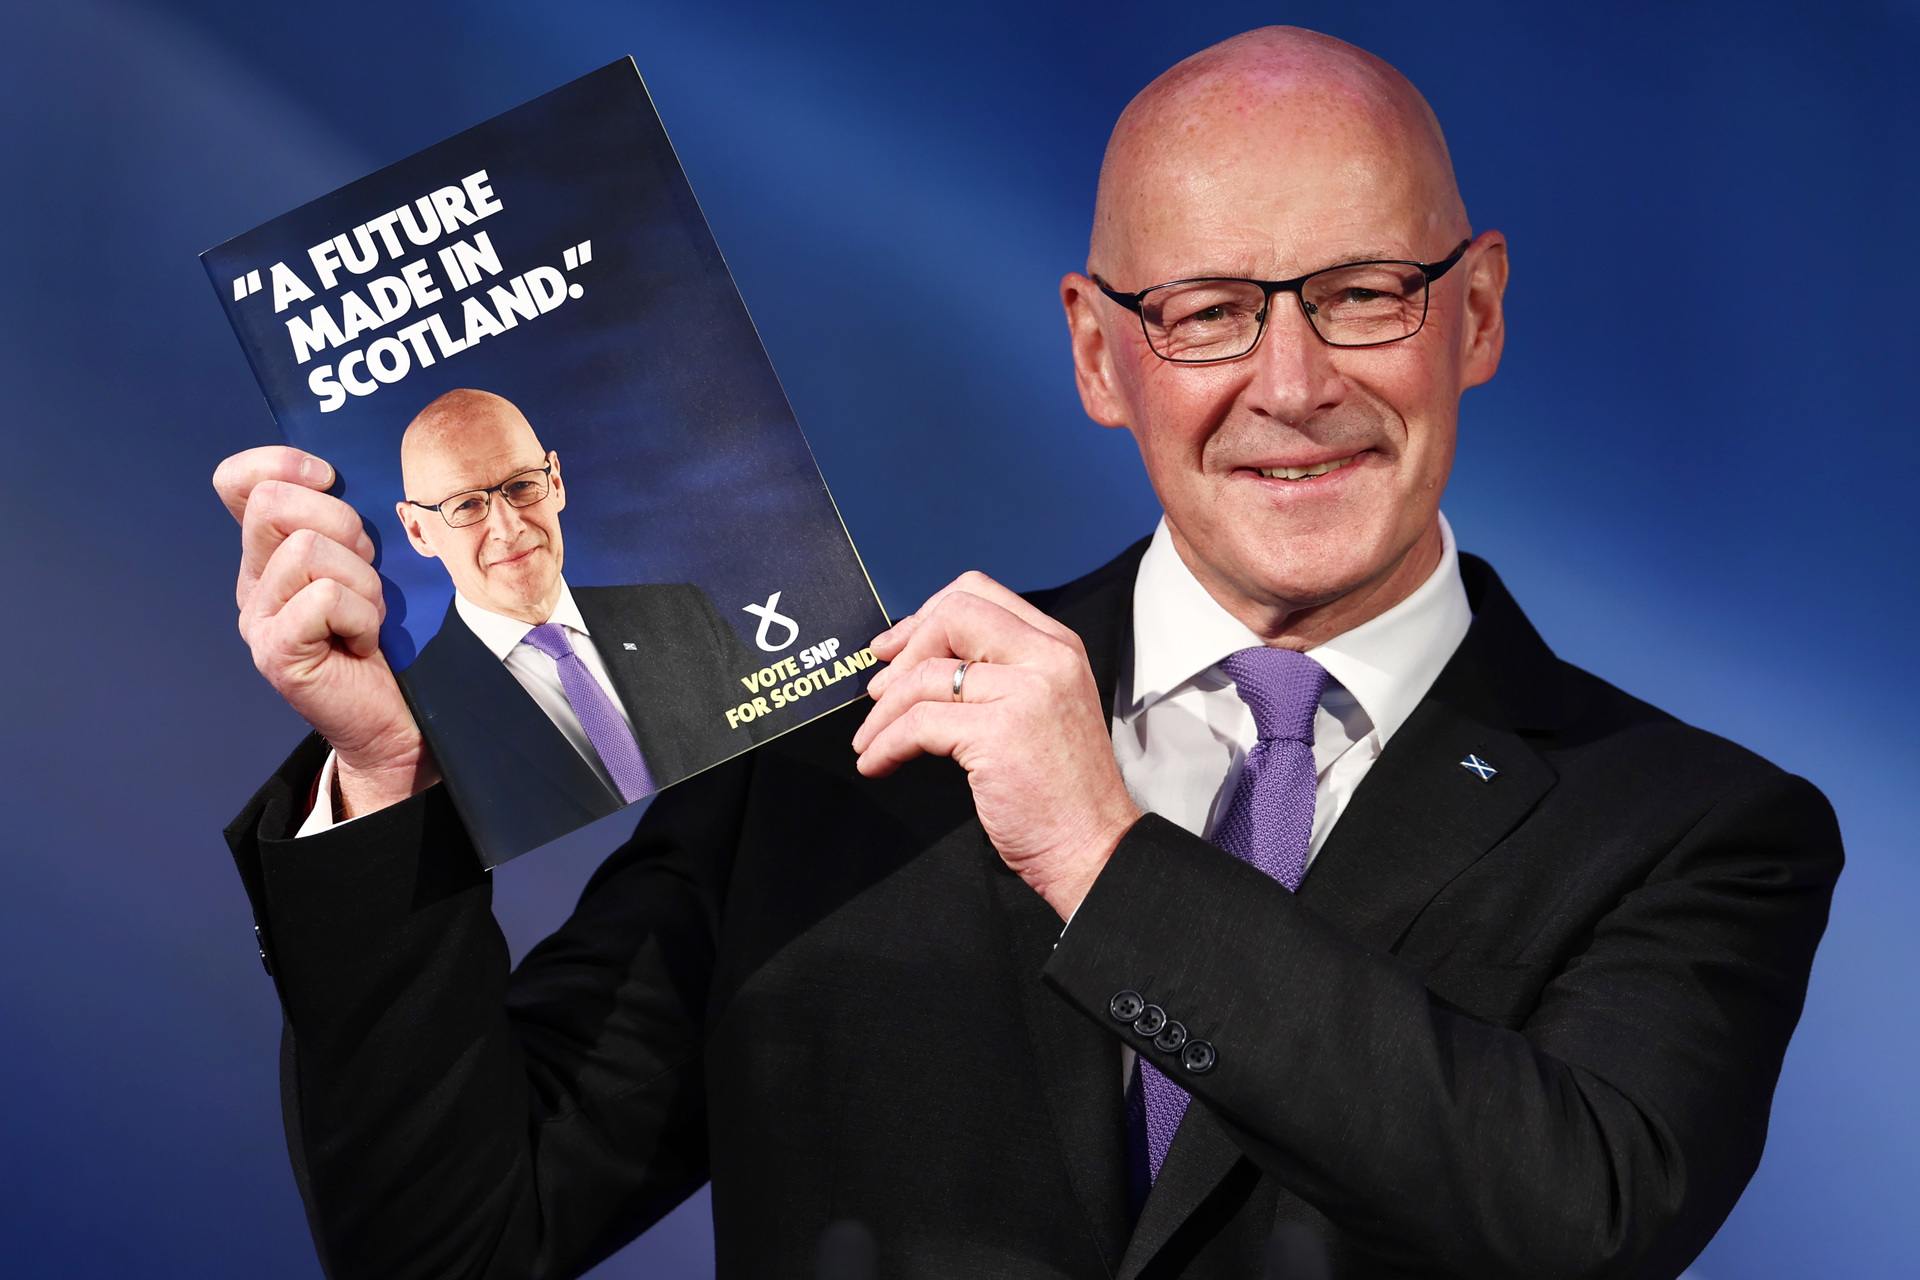 John Swinney said a vote for the SNP is a vote for independence.